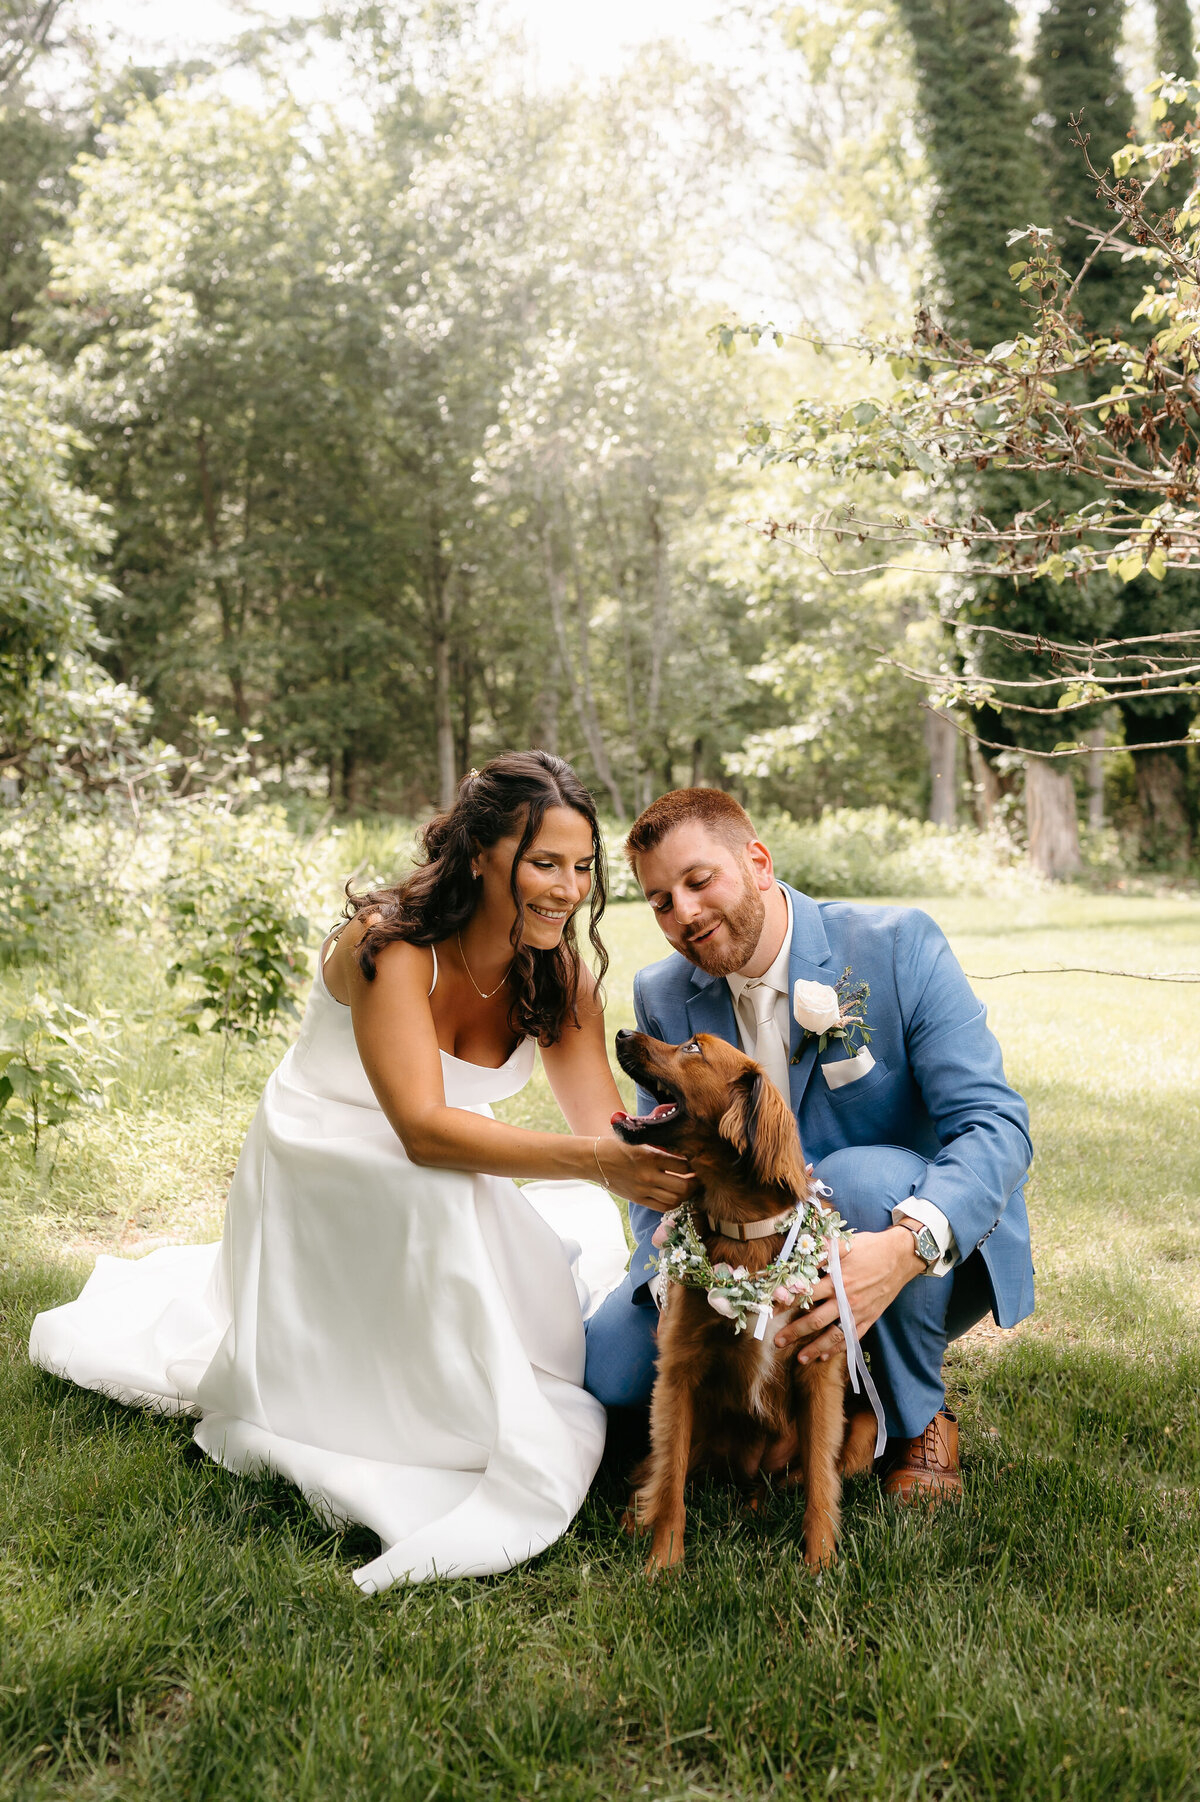 Wedding Portraits by Lisa Blanche Photography